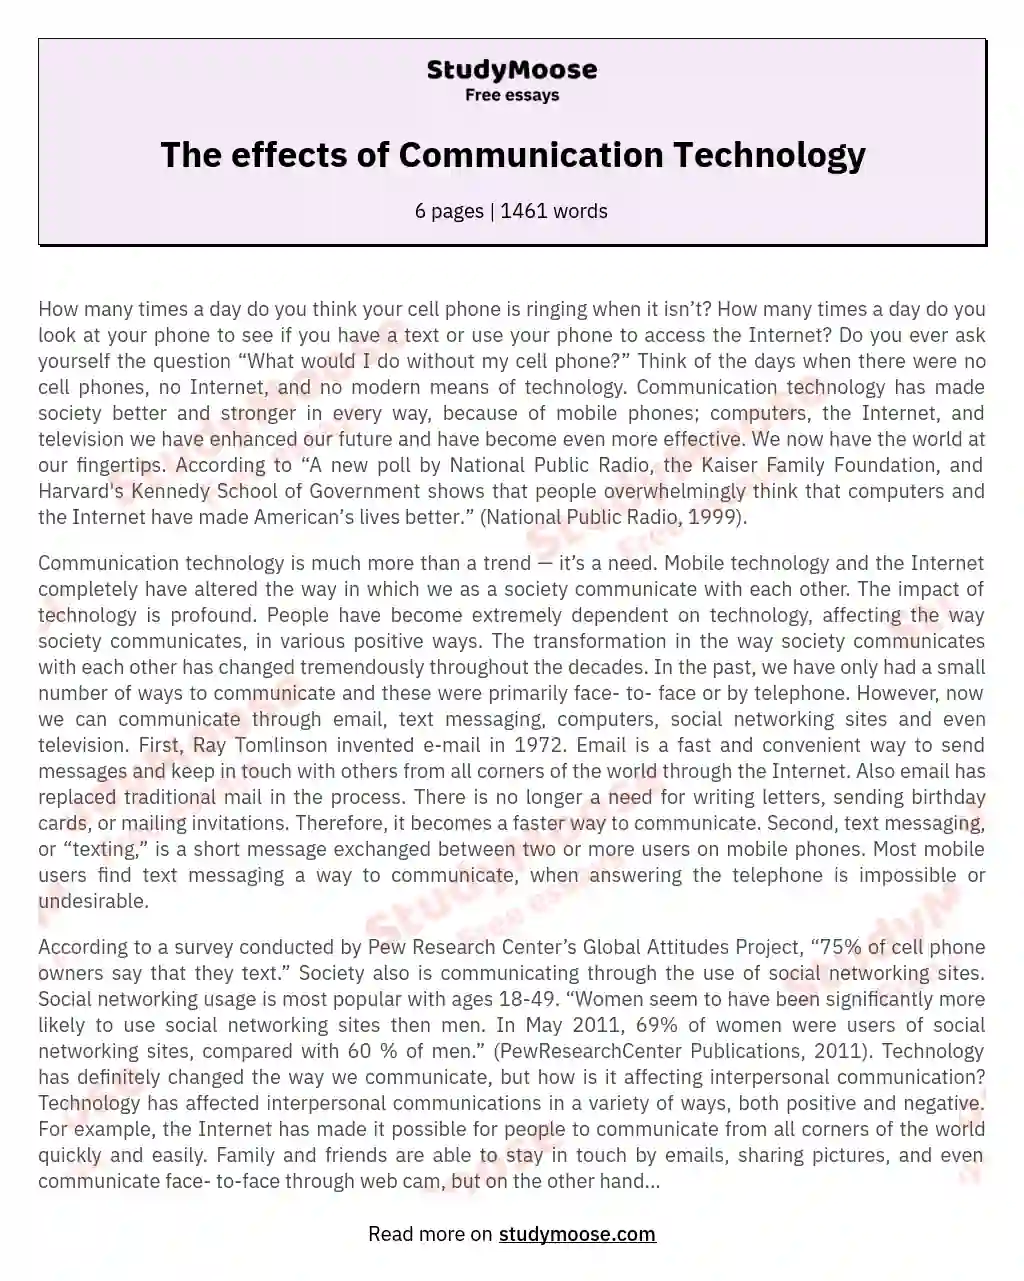 The effects of Communication Technology essay